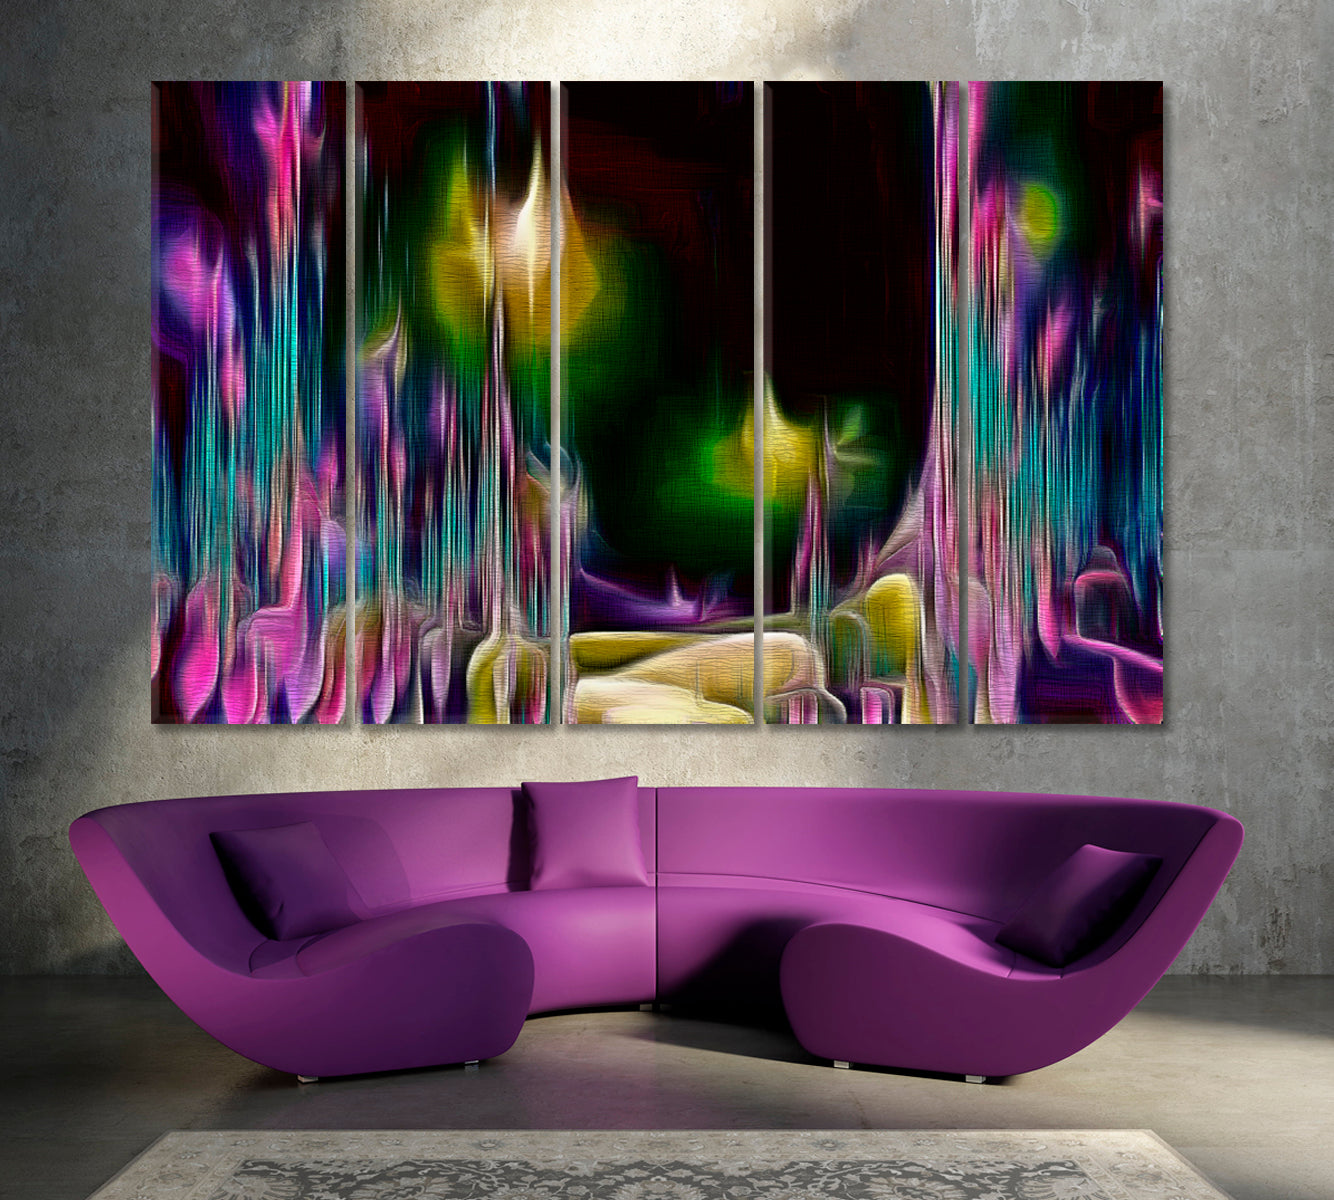 Abstract Fractal Psychedelic Shape Purple On Black Modern Art Contemporary Art Artesty 5 panels 36" x 24" 